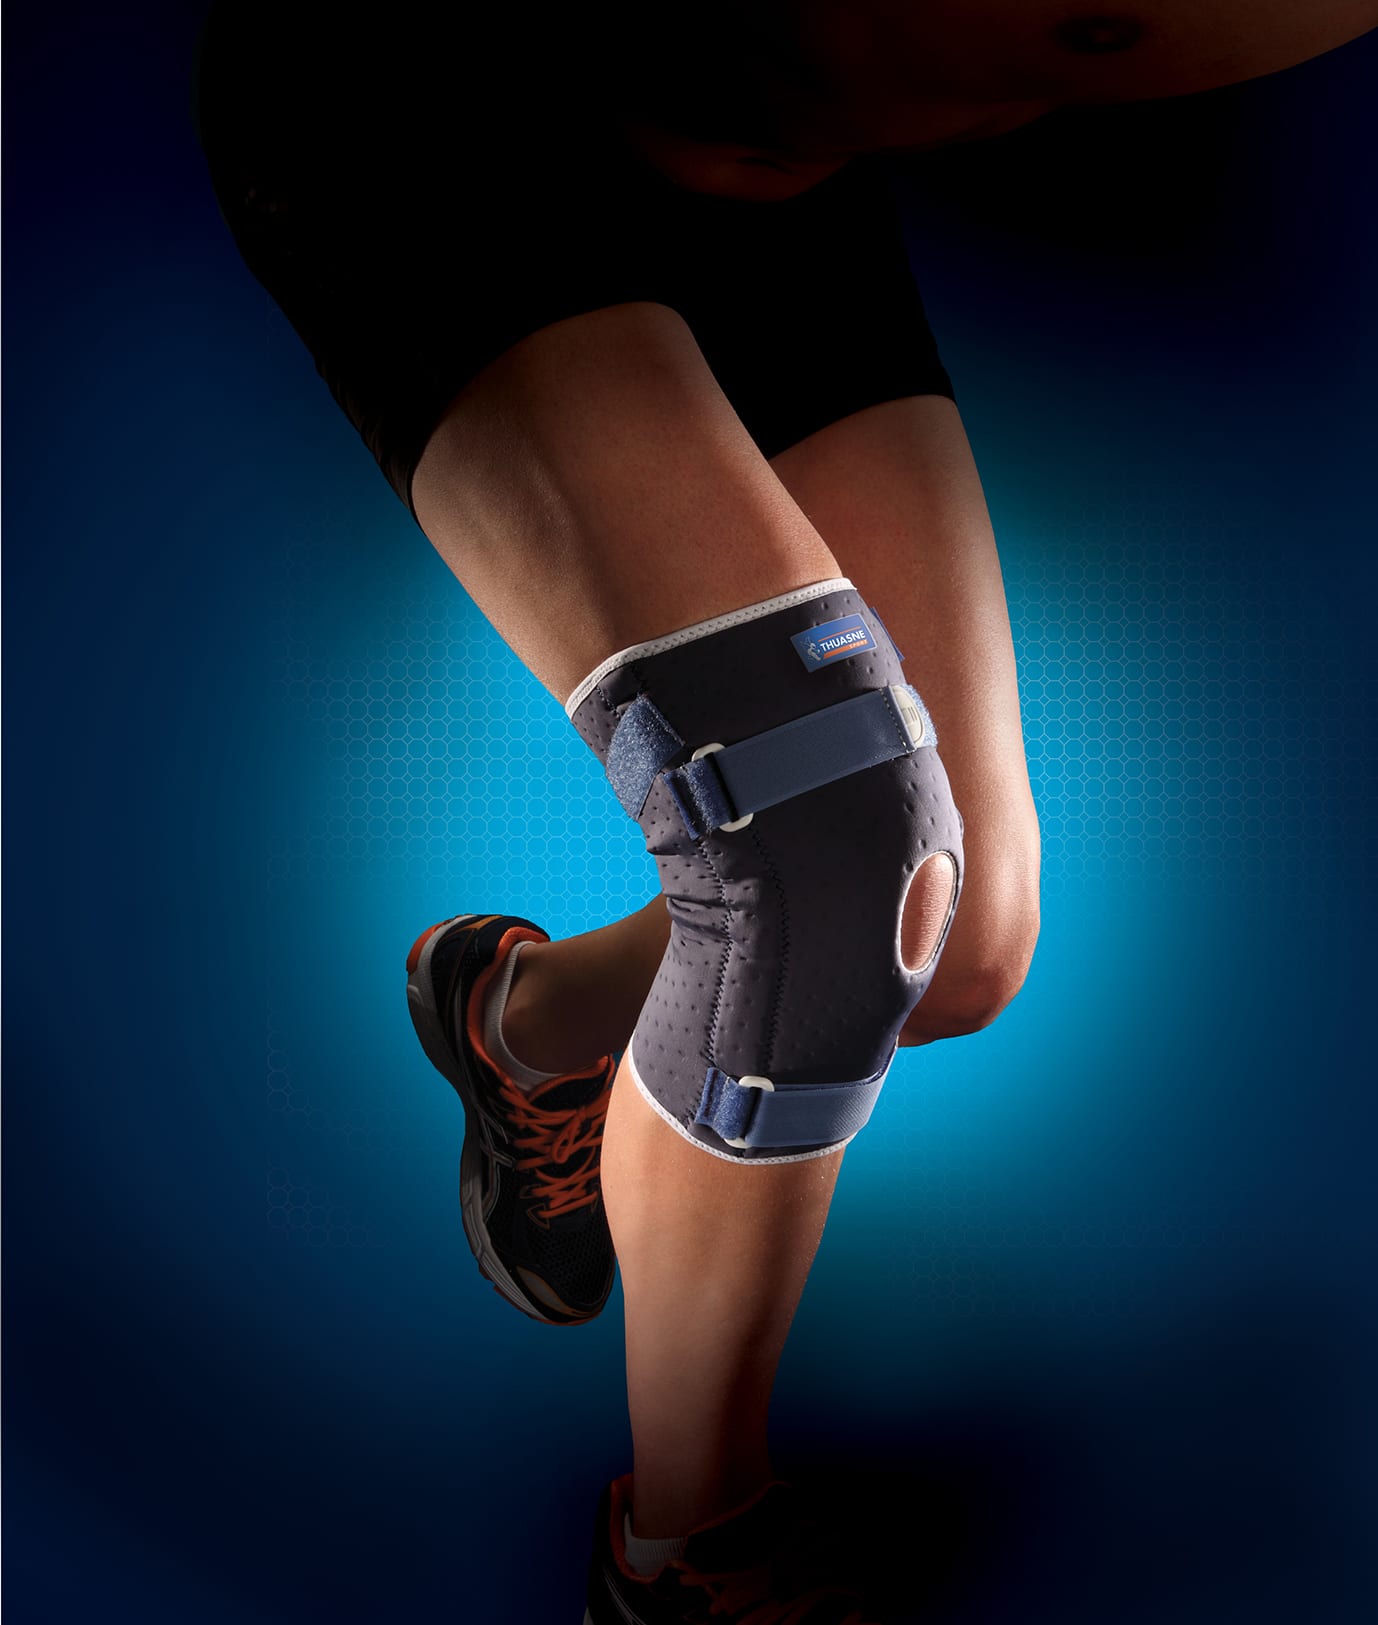 A person wearing a Thuasne Reinforced Ligament Knee Brace